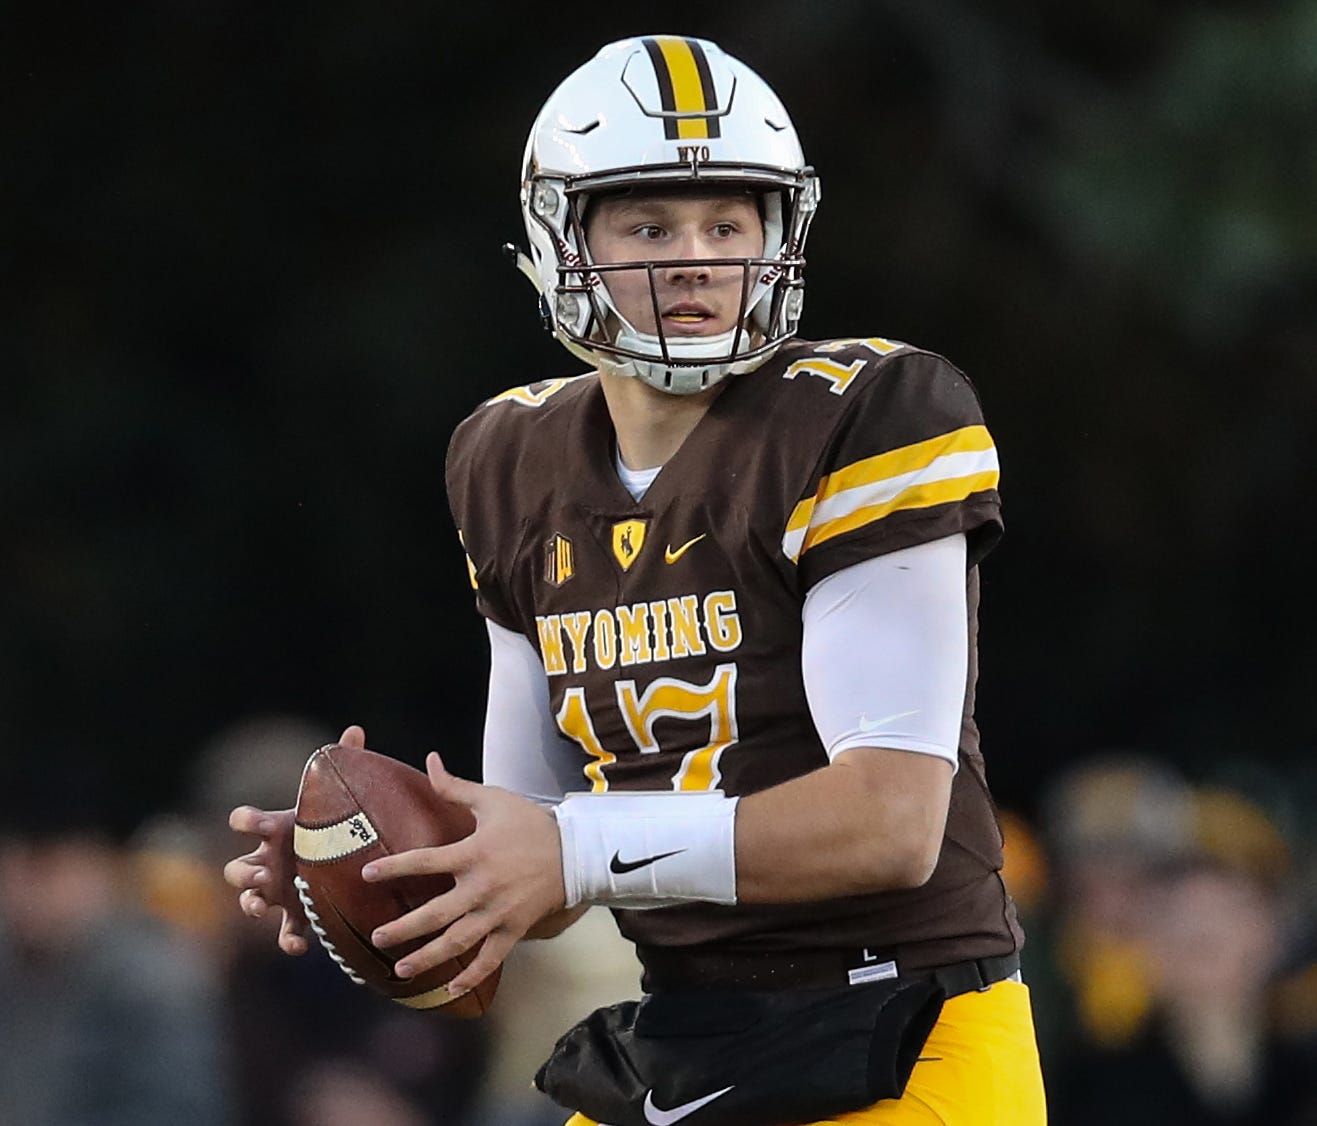 Wyoming Cowboys quarterback Josh Allen (17) looks to throw against the New Mexico Lobos during the first quarter at War Memorial Stadium.